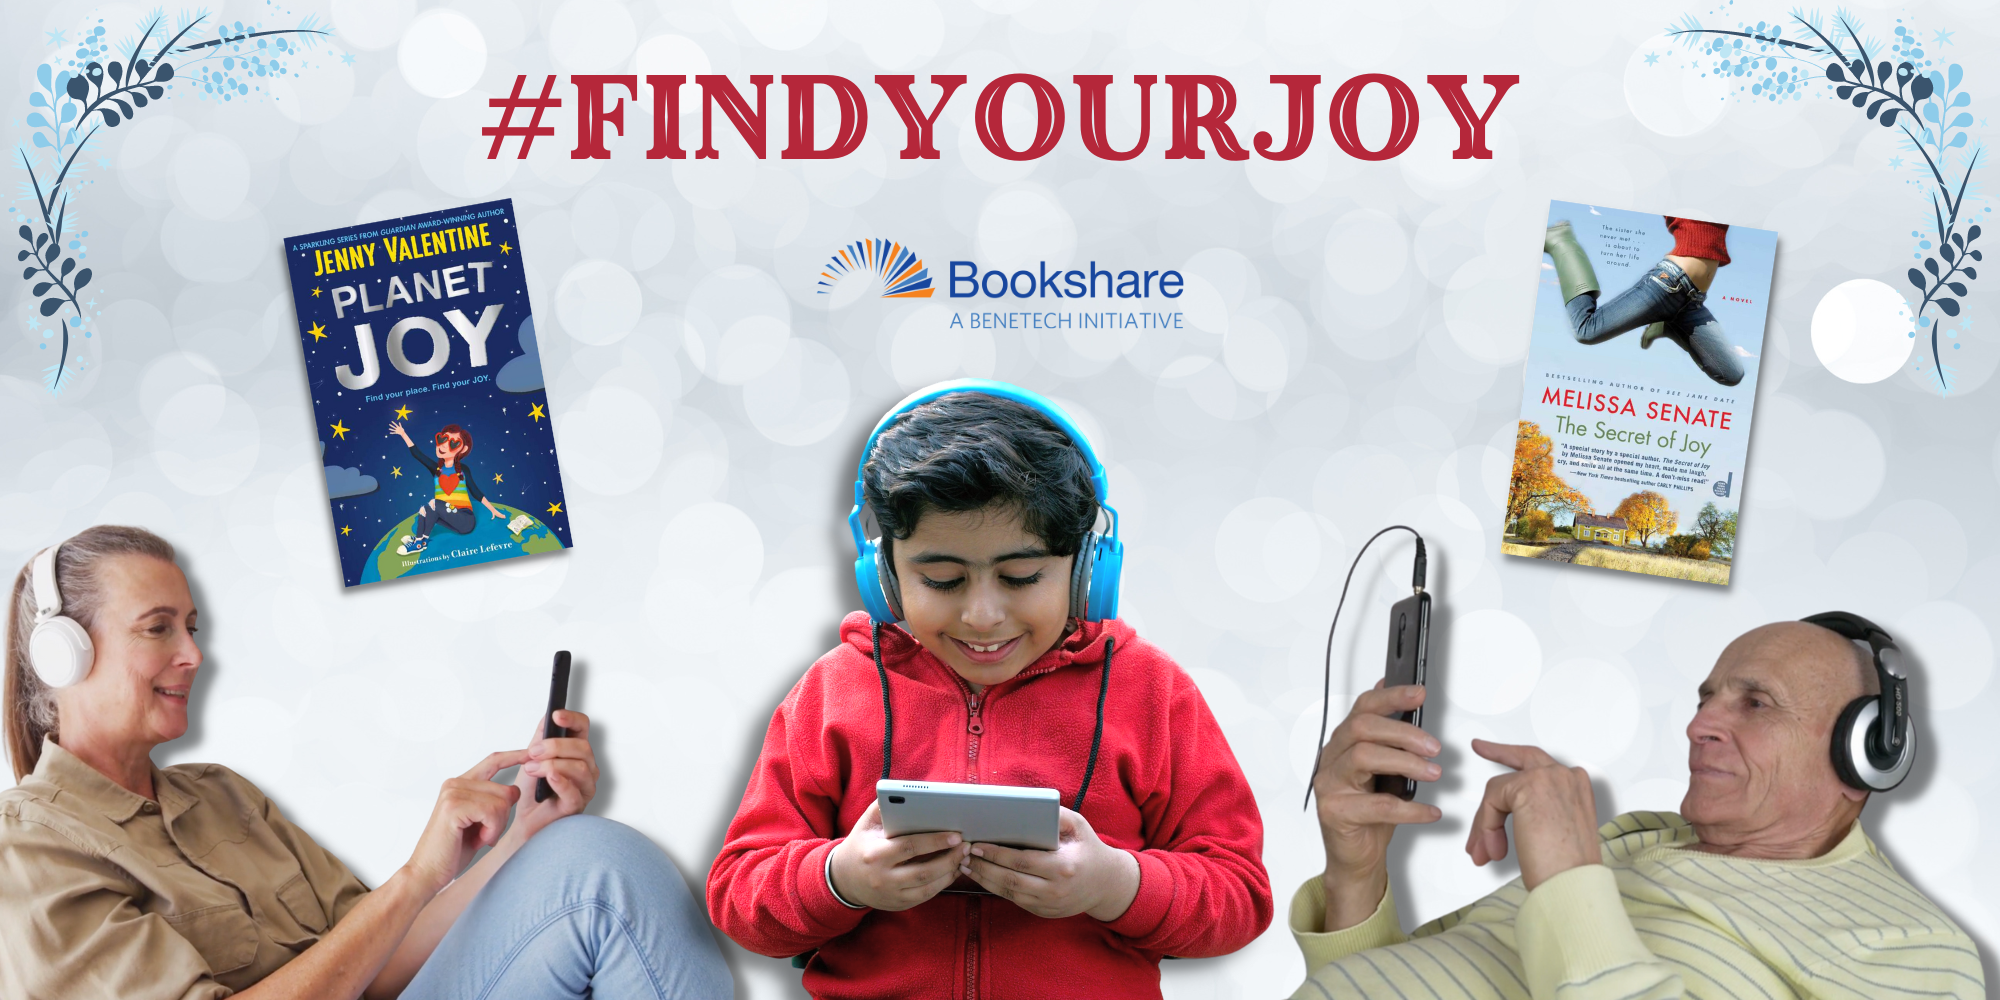 Find Your Joy header image. Book covers. Bookshare audience reading on tablets.